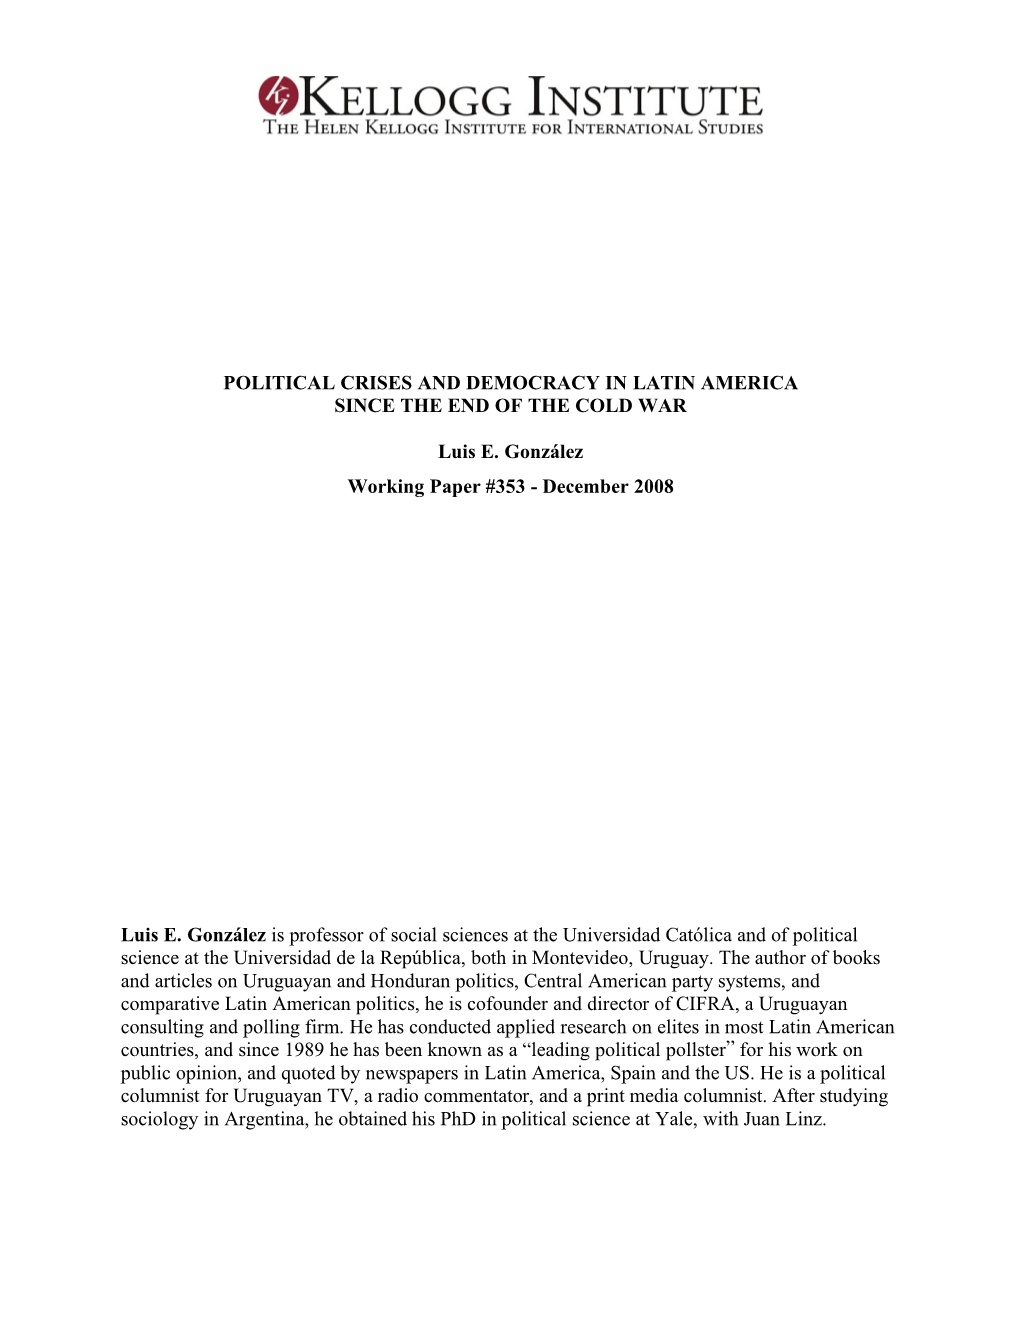 Political Crises and Democracy in Latin America Since the End of the Cold War